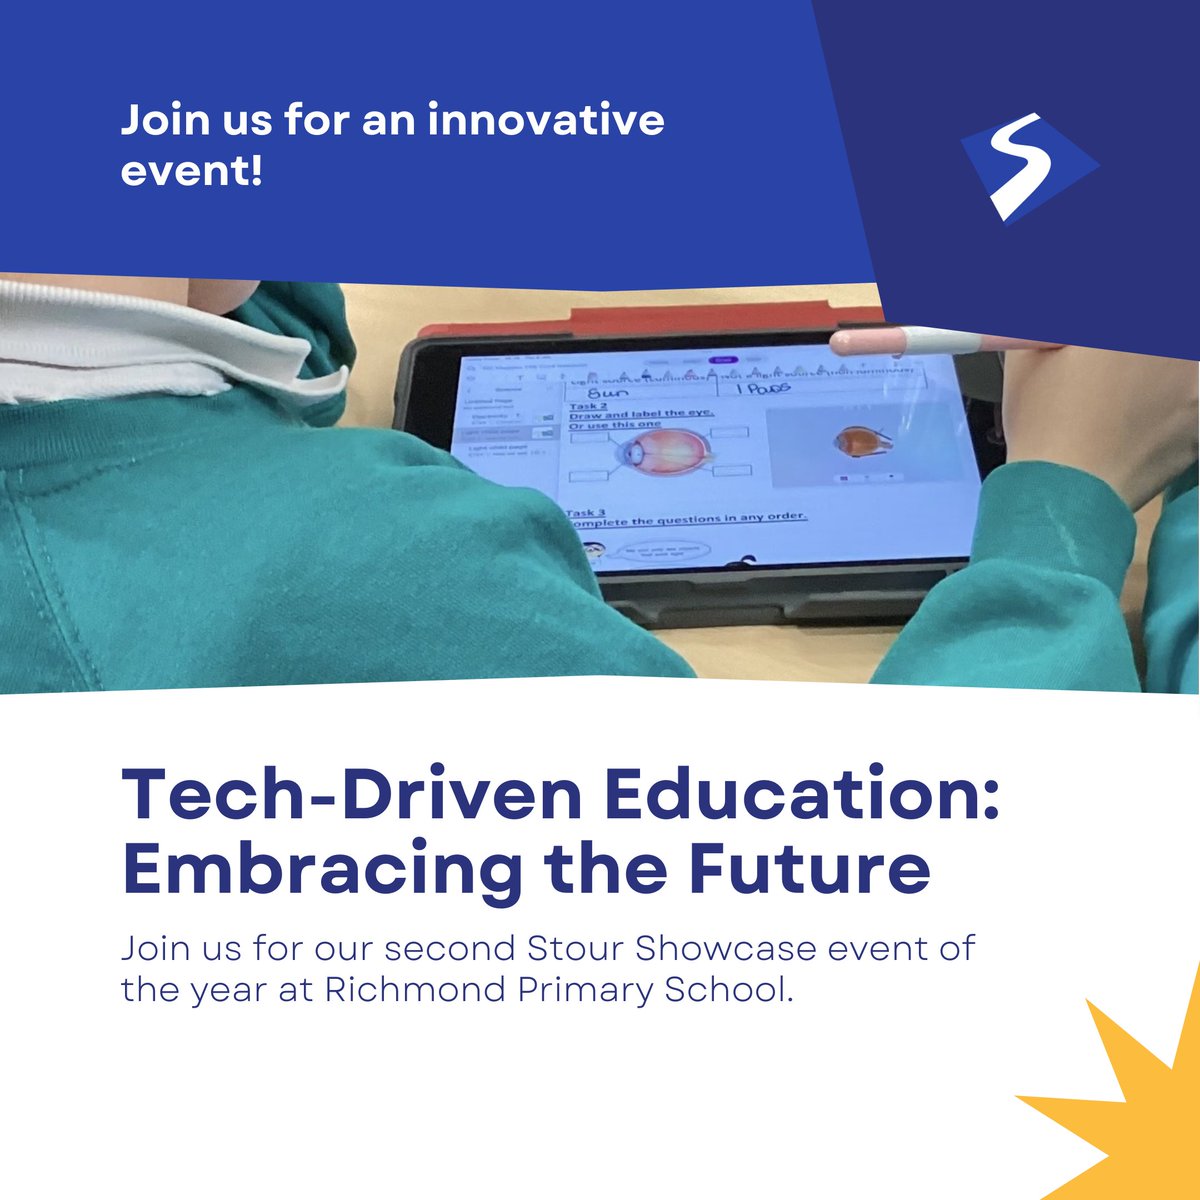 Join us for our second Stour Showcase event of the year at Richmond Primary School. eventbrite.co.uk/e/stour-showca… #EdTech #InnovationInEducation #FutureOfLearning #digitaltransformation #stourshowcase #primaryedcation